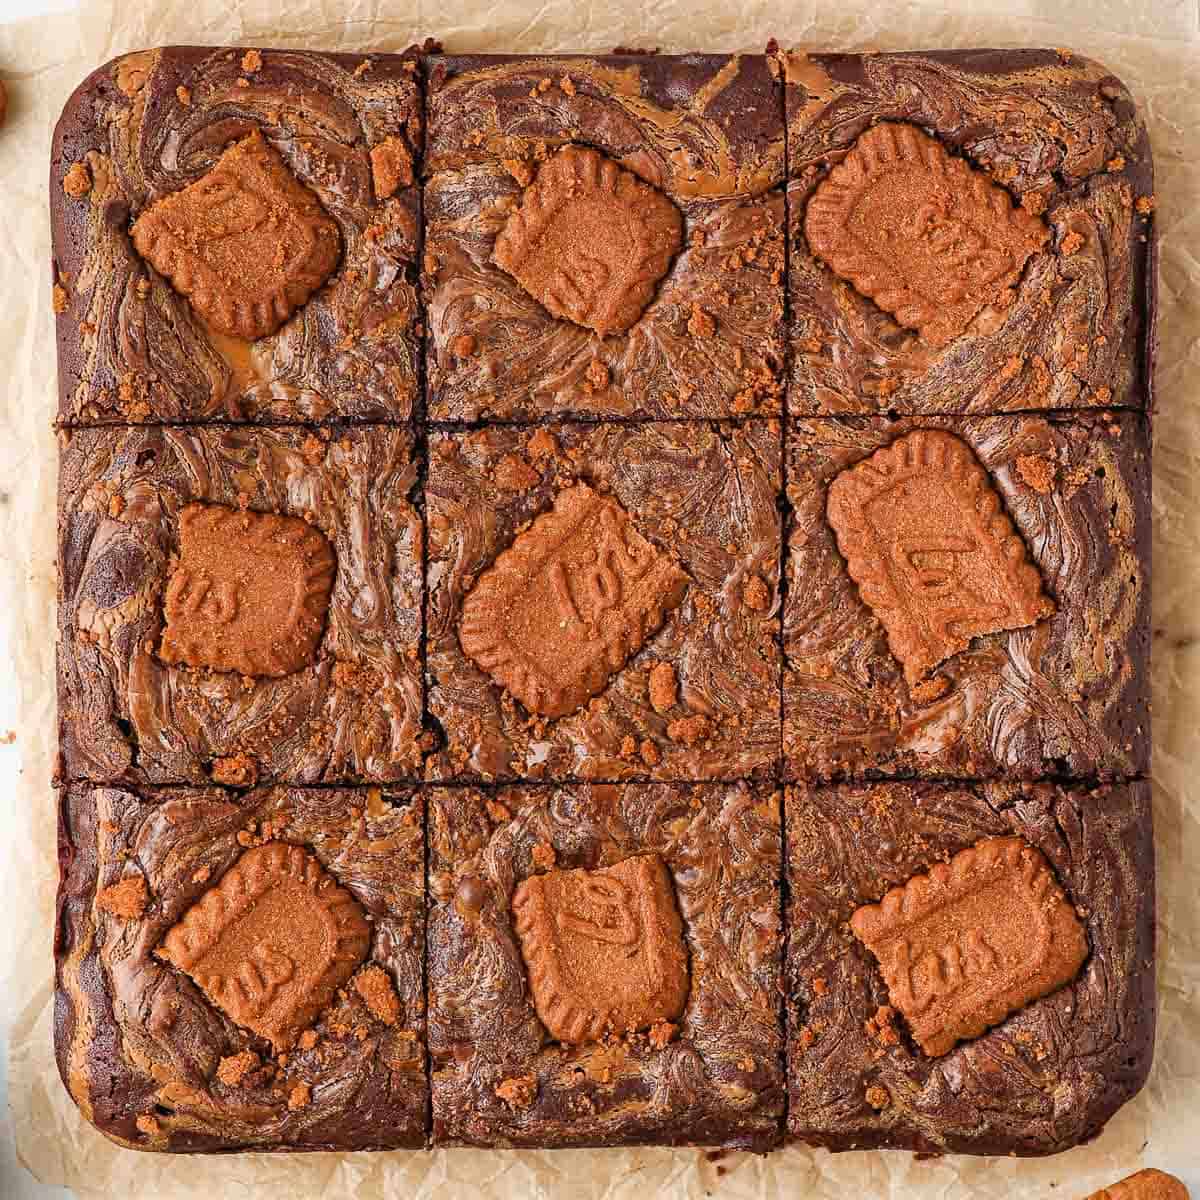 Biscoff Brownie sliced into 9 pieces, seen from above